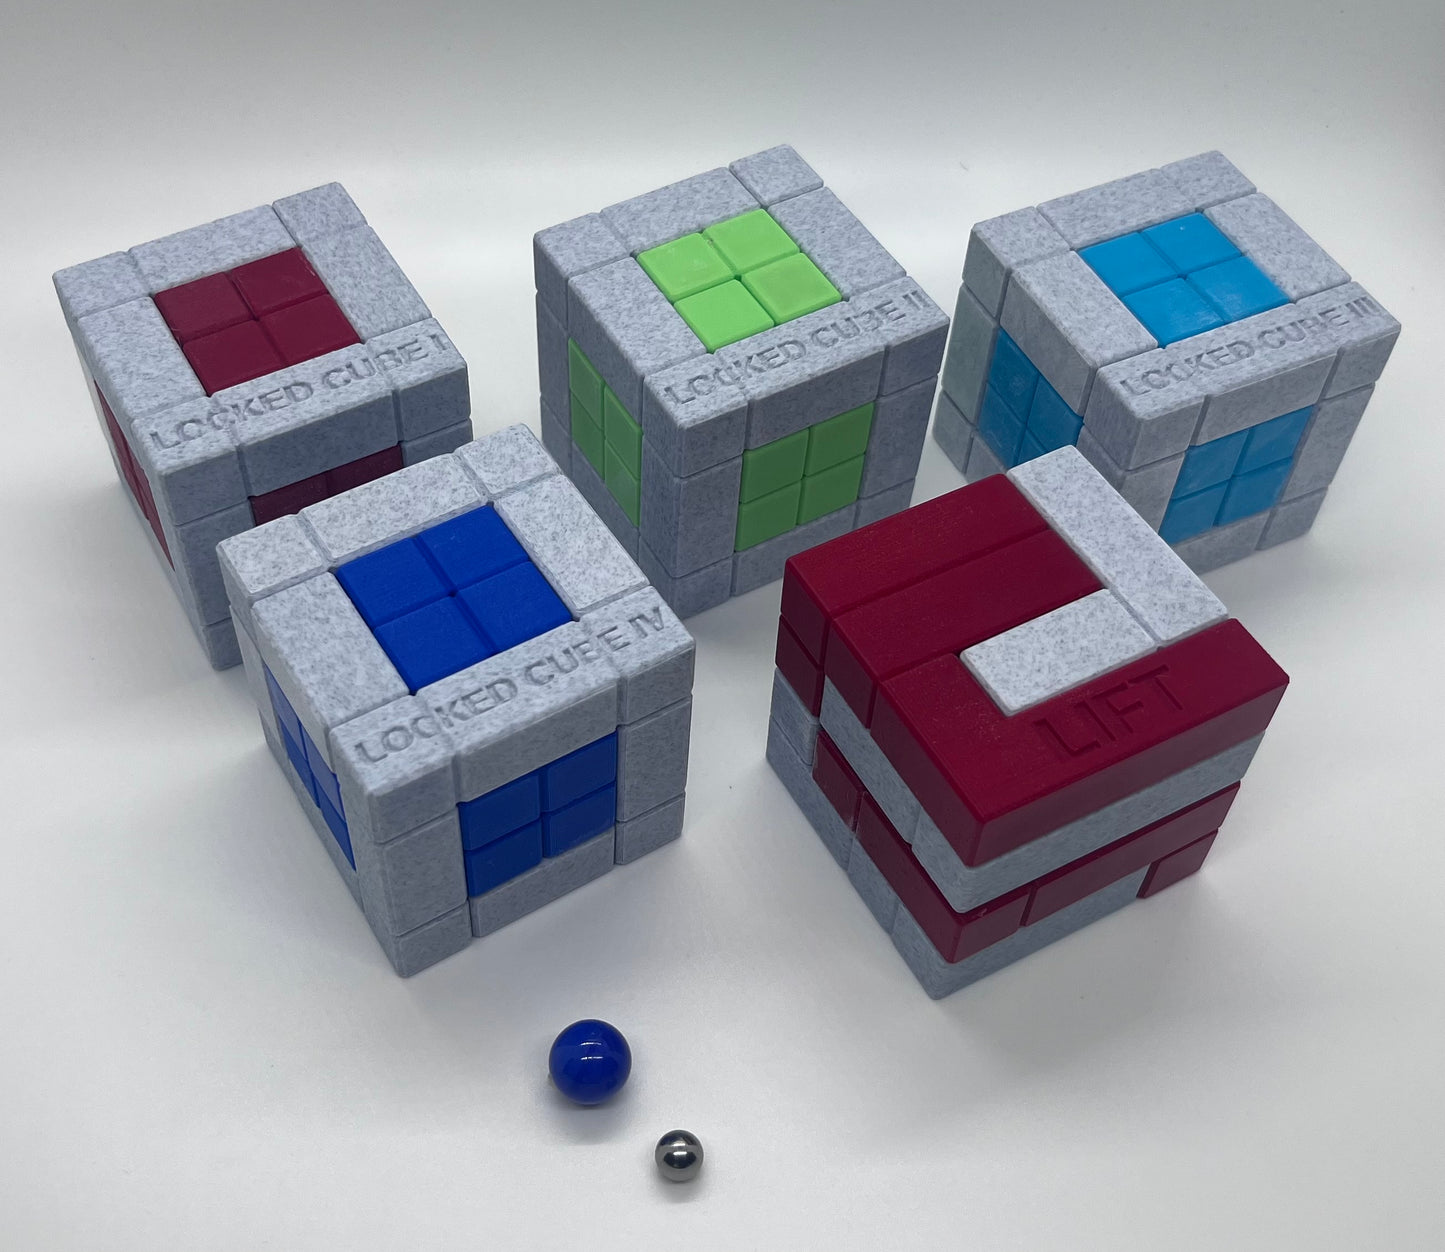 Download 3D Printable STL Files for 10 3D Packing Interlocking Cube Puzzles with Marbles